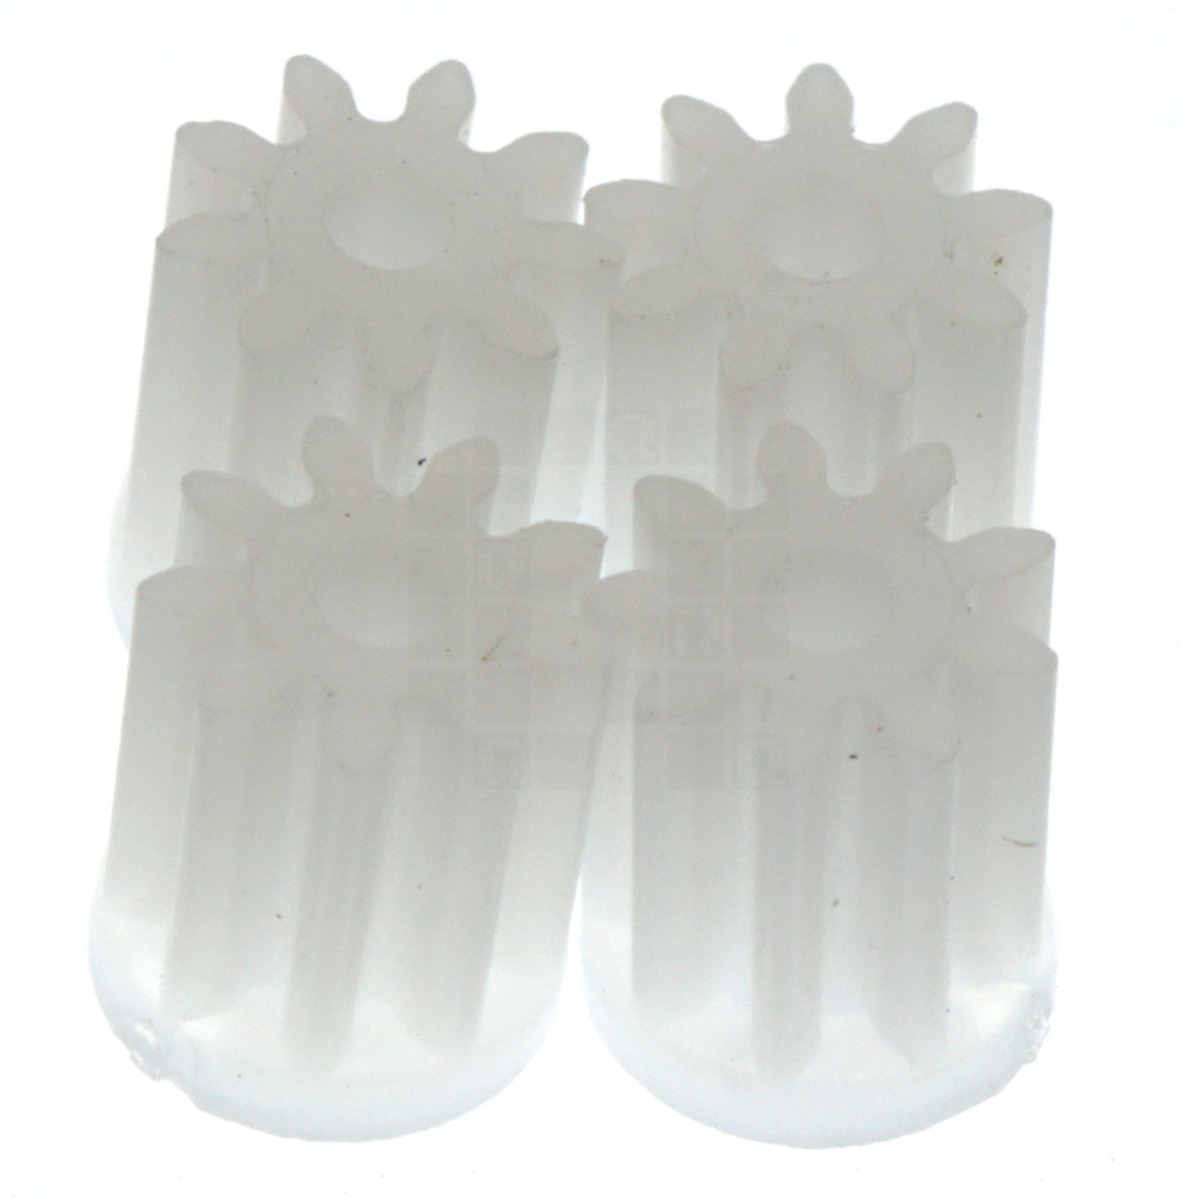 9 Tooth Plastic Electric Motor Drone Gear, 4 Pack, for Syma Quadcopters